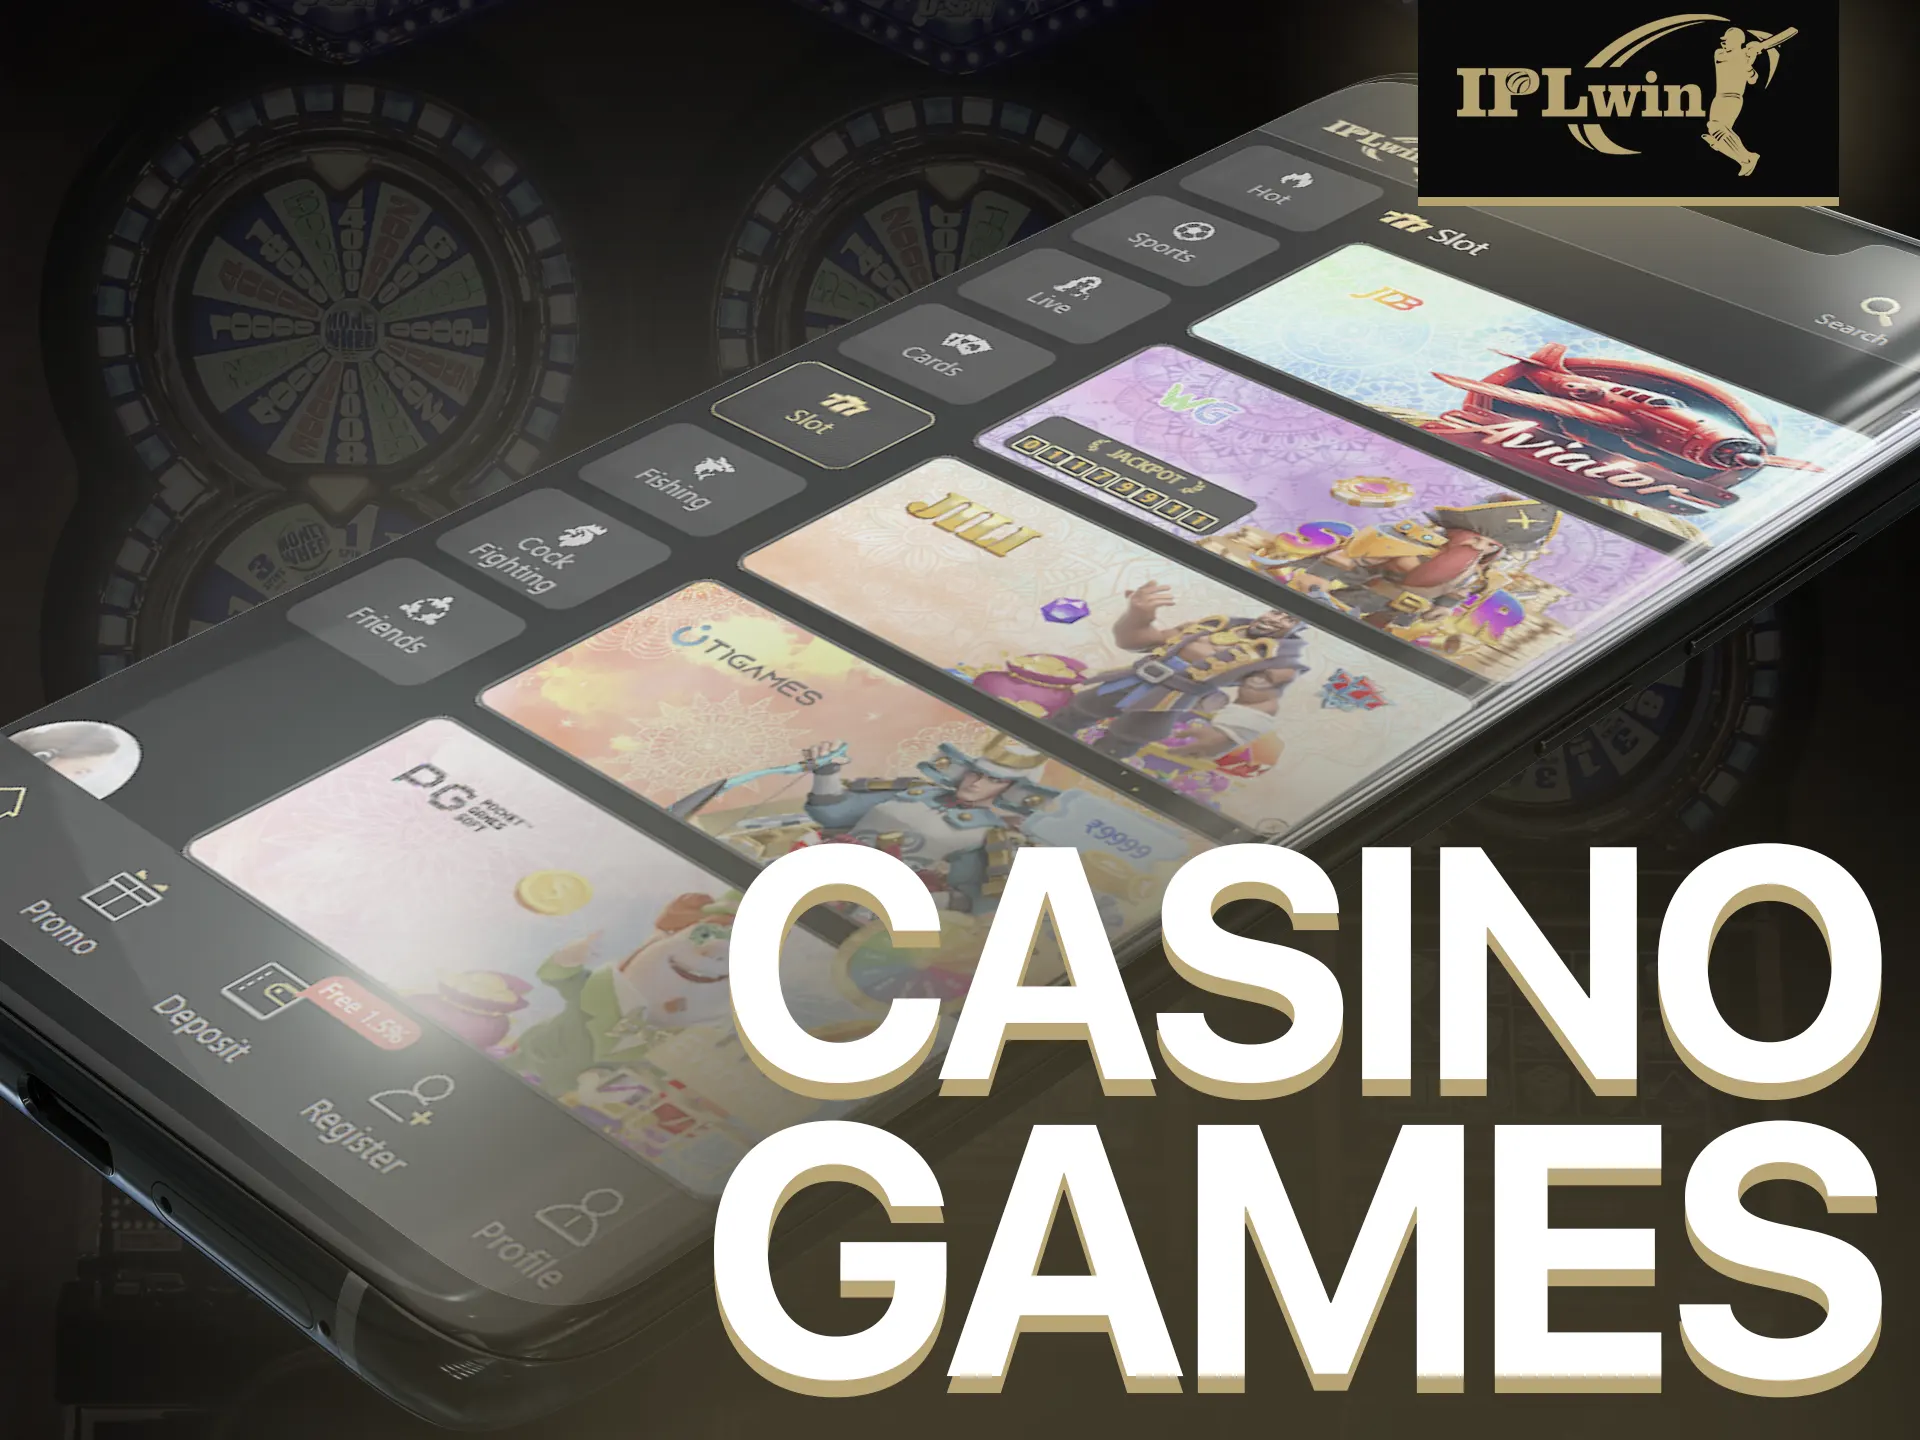 Check out the most popular IPLWIN casino games.